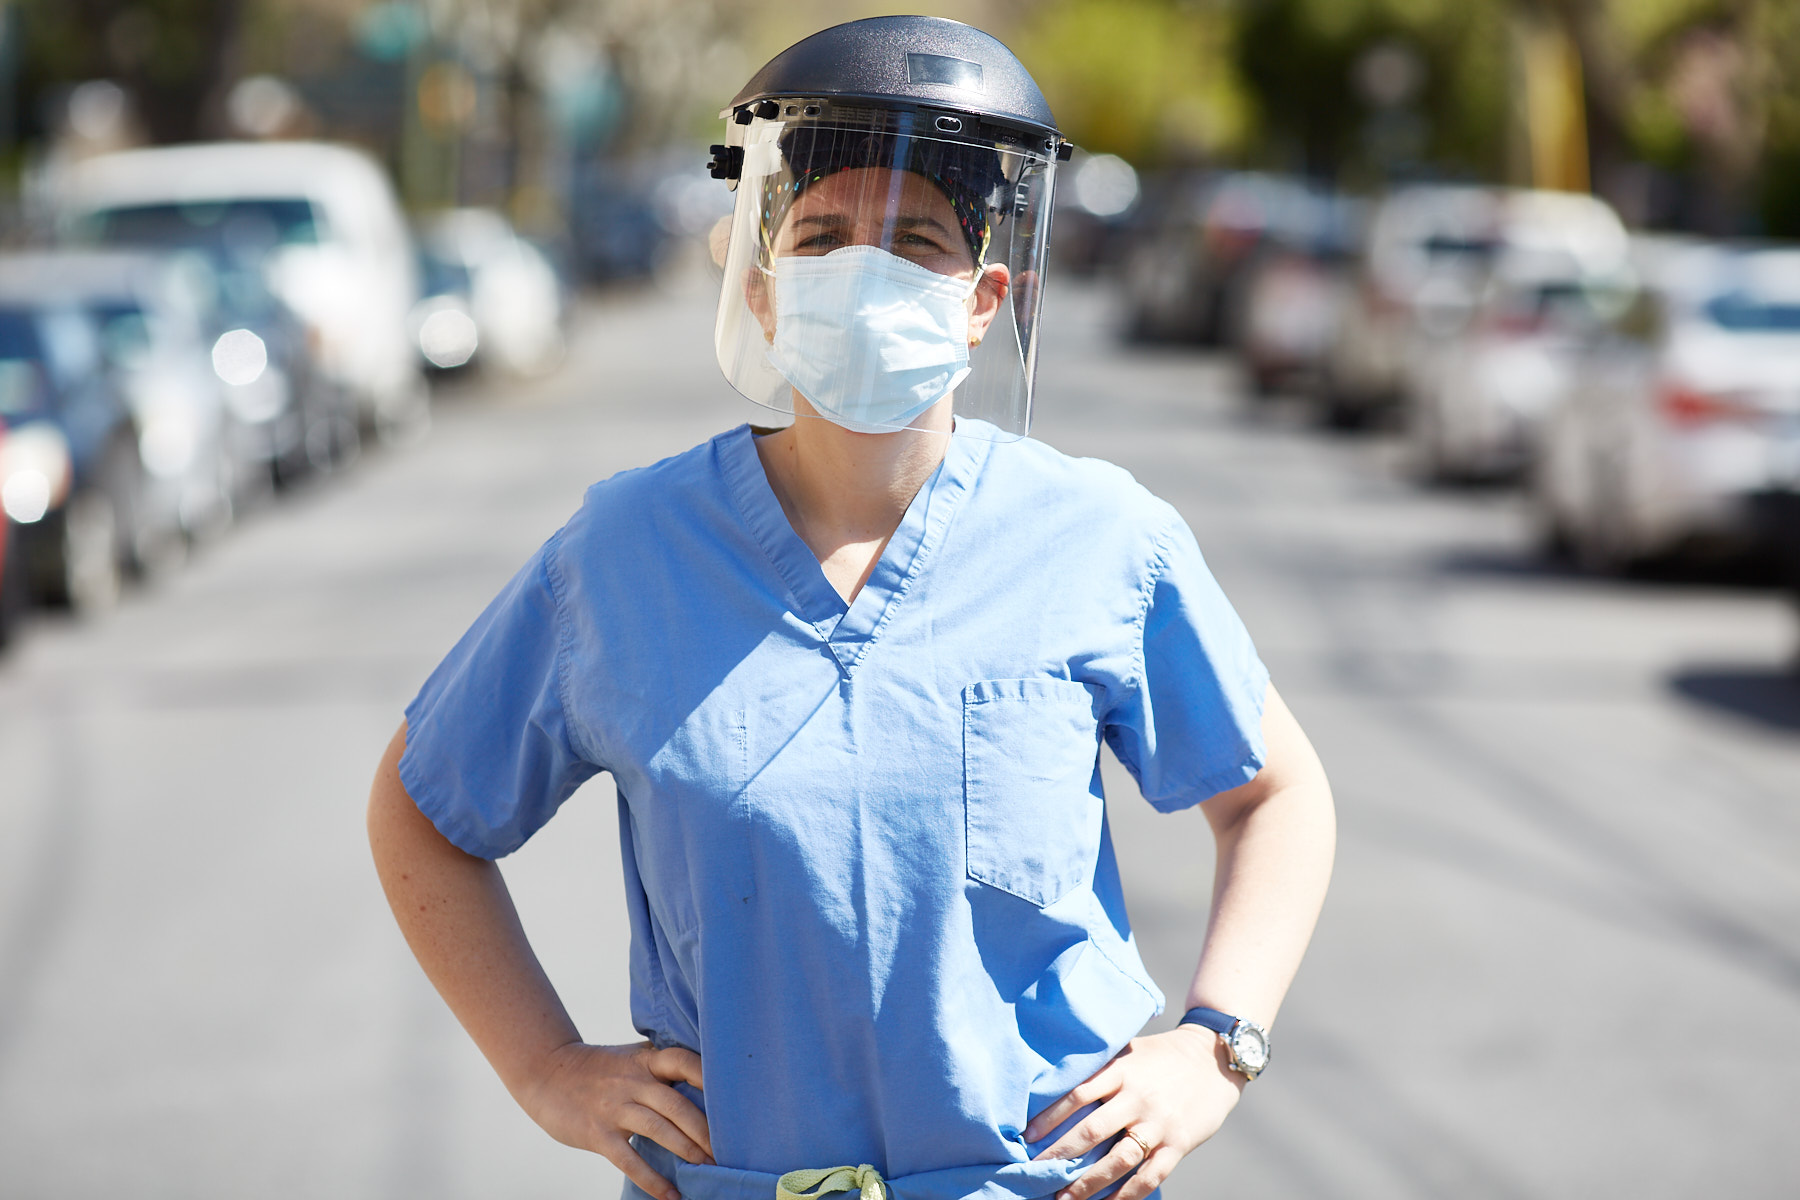 model released nurses and healthcare workers during coronavirus stock photos